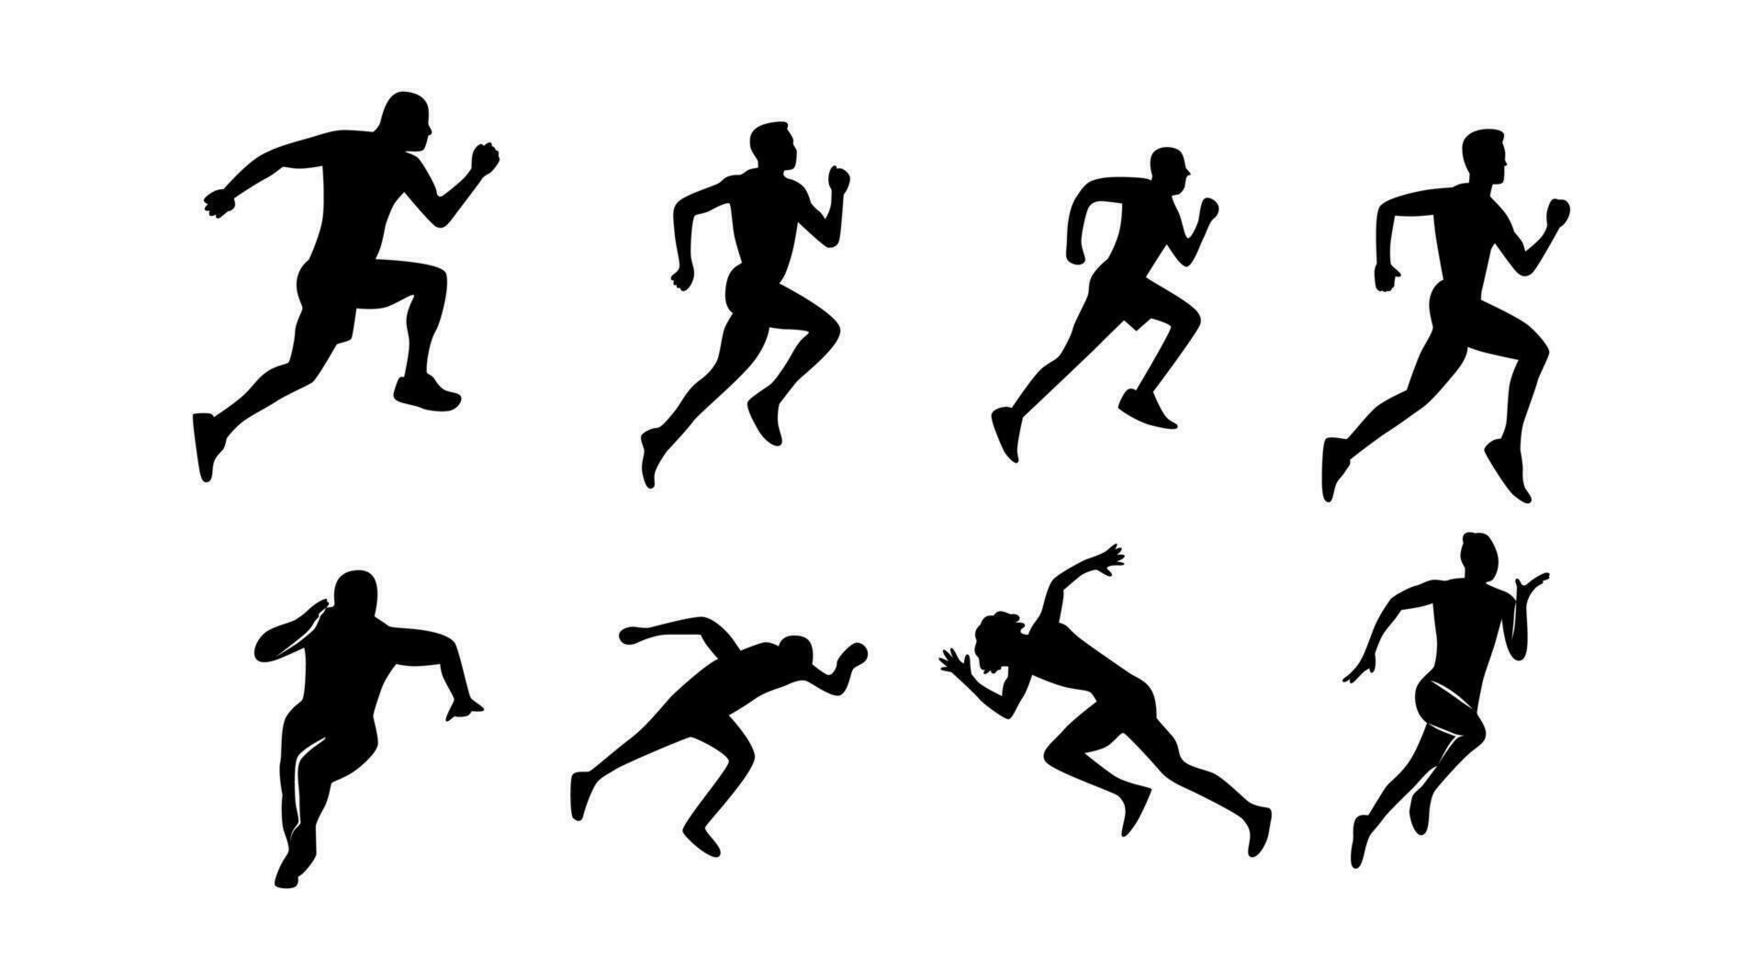 set of silhouettes of running athletes vector